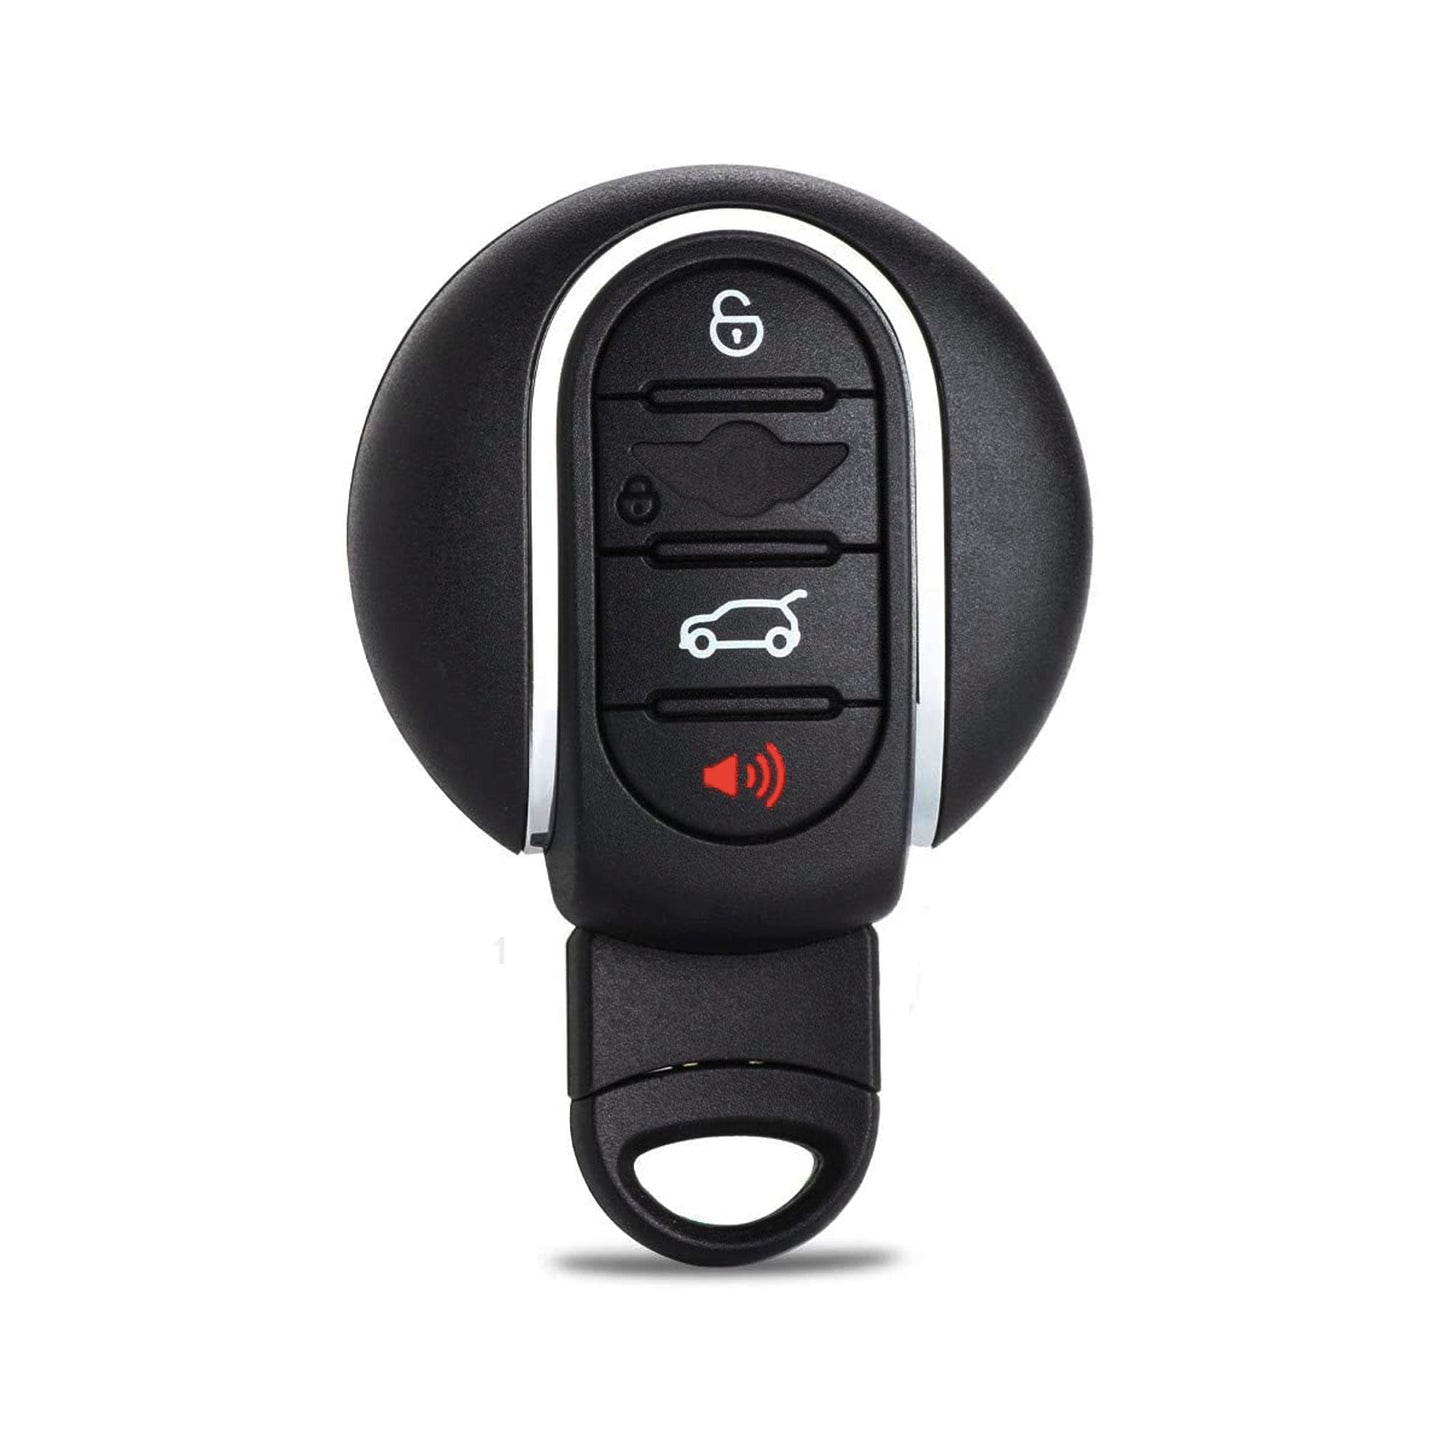 4 Buttons 434MHz Keyless Entry Smart Remote Key Fob for BMW MINI Copper 2015-2019 FCC : NBGIDGNG1 P/N : 9367411-01 185409-10 SKU:498